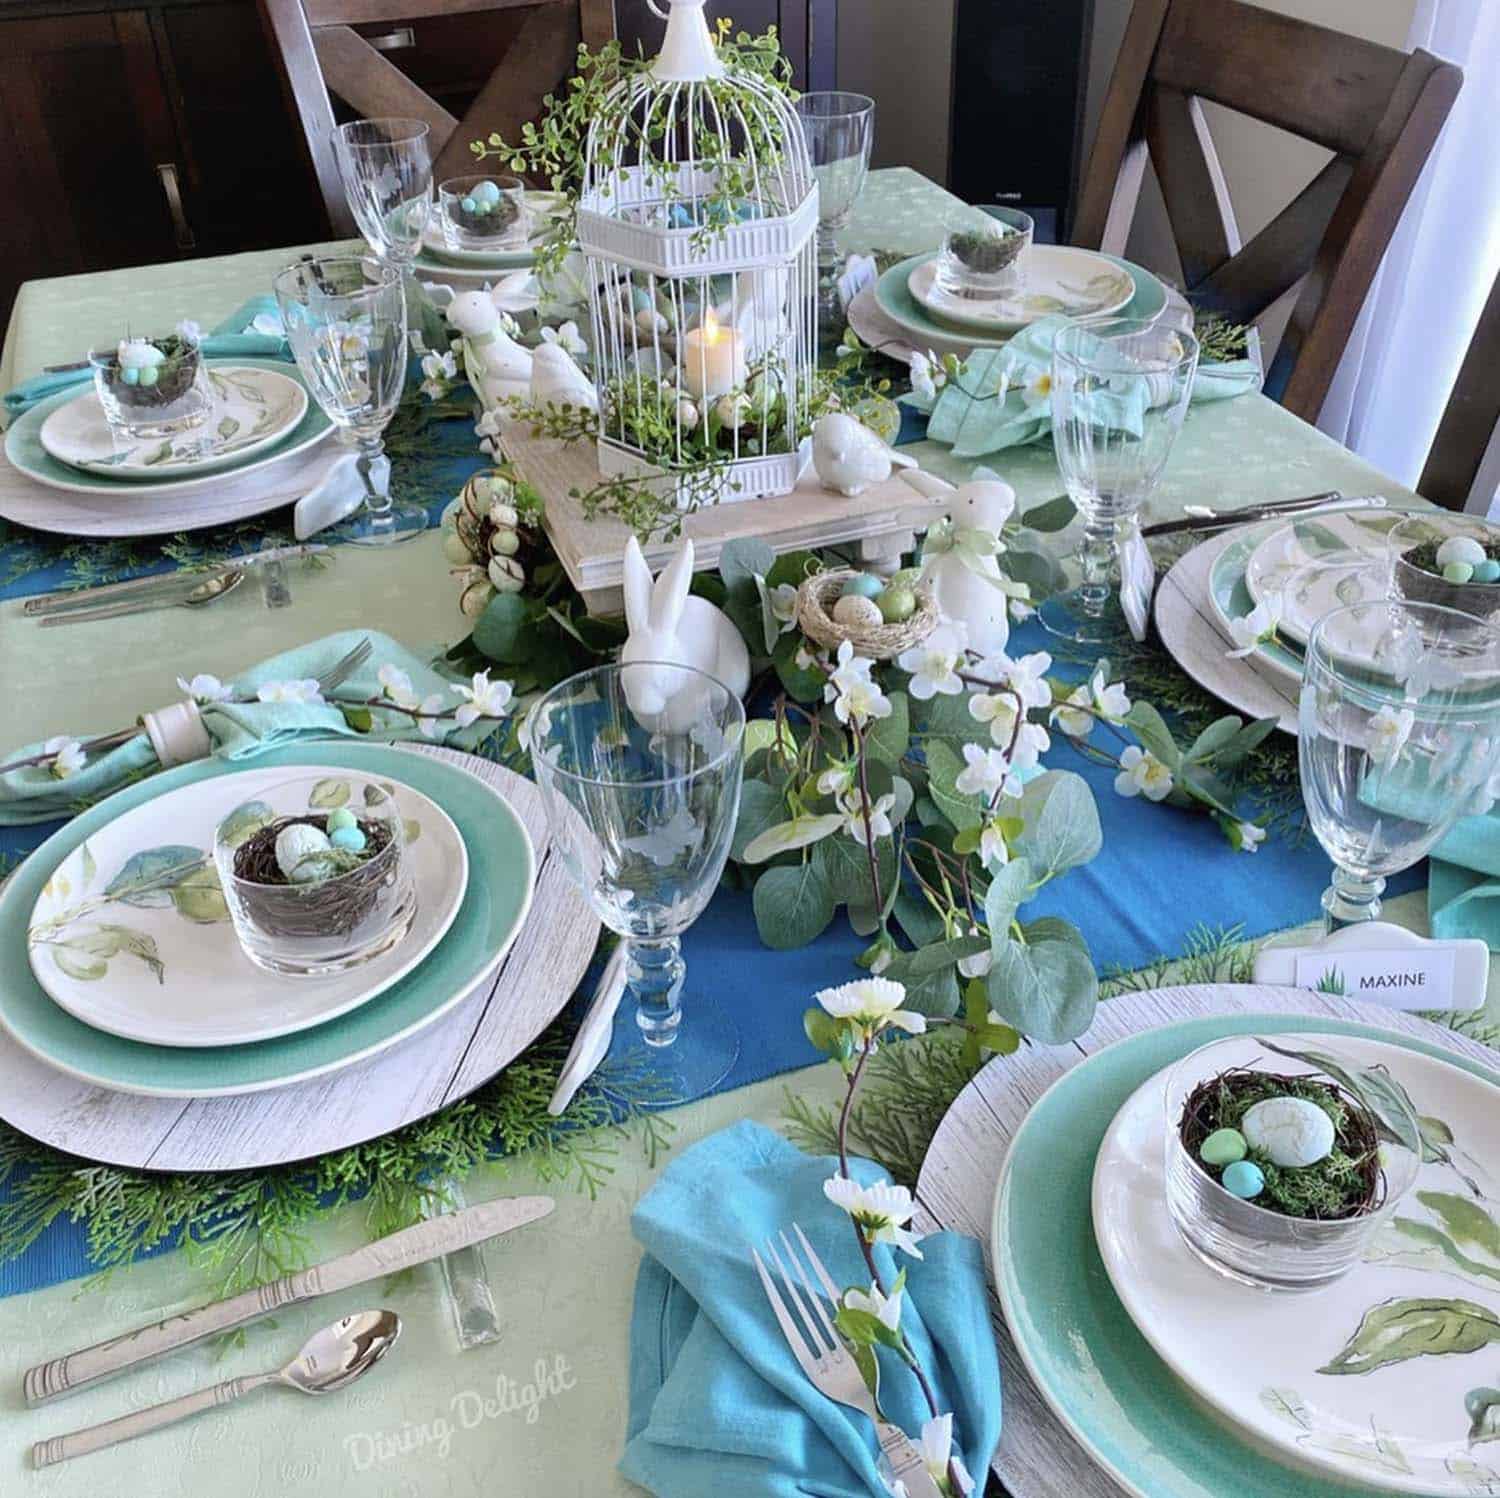 Easter dining table decor with personalized place settings